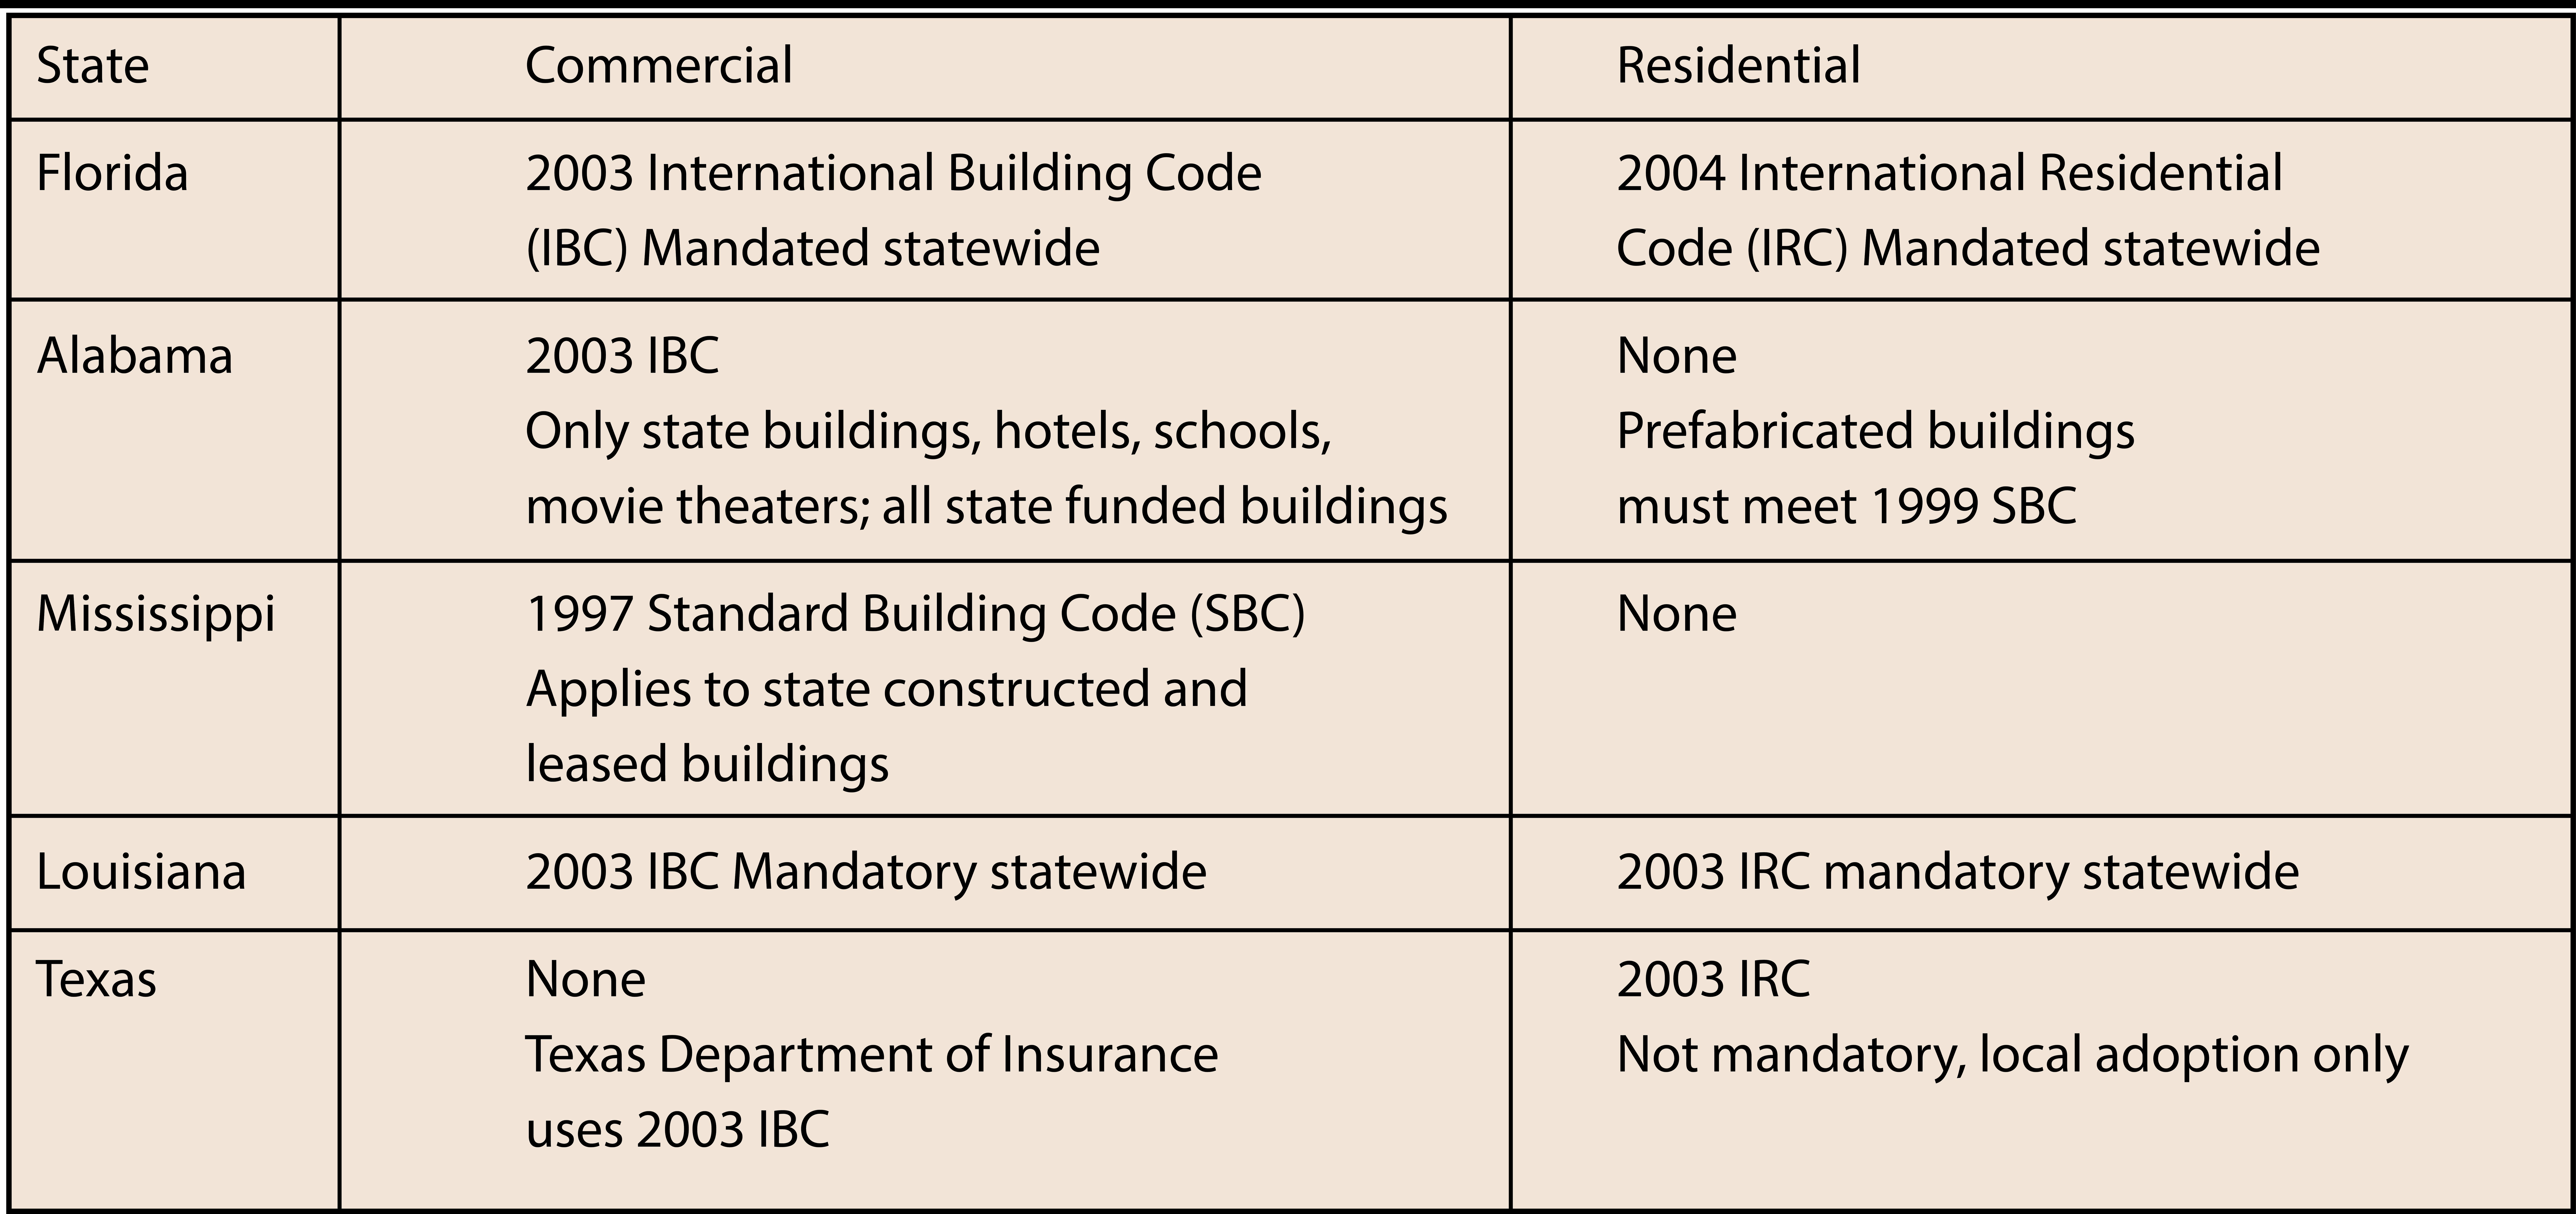 Extracted from Institute for Business and Home Safety Web Site (http://ibhs.org./building_codes/residential_bldg_codes.asp?state=36results, accessed Jan 2007)